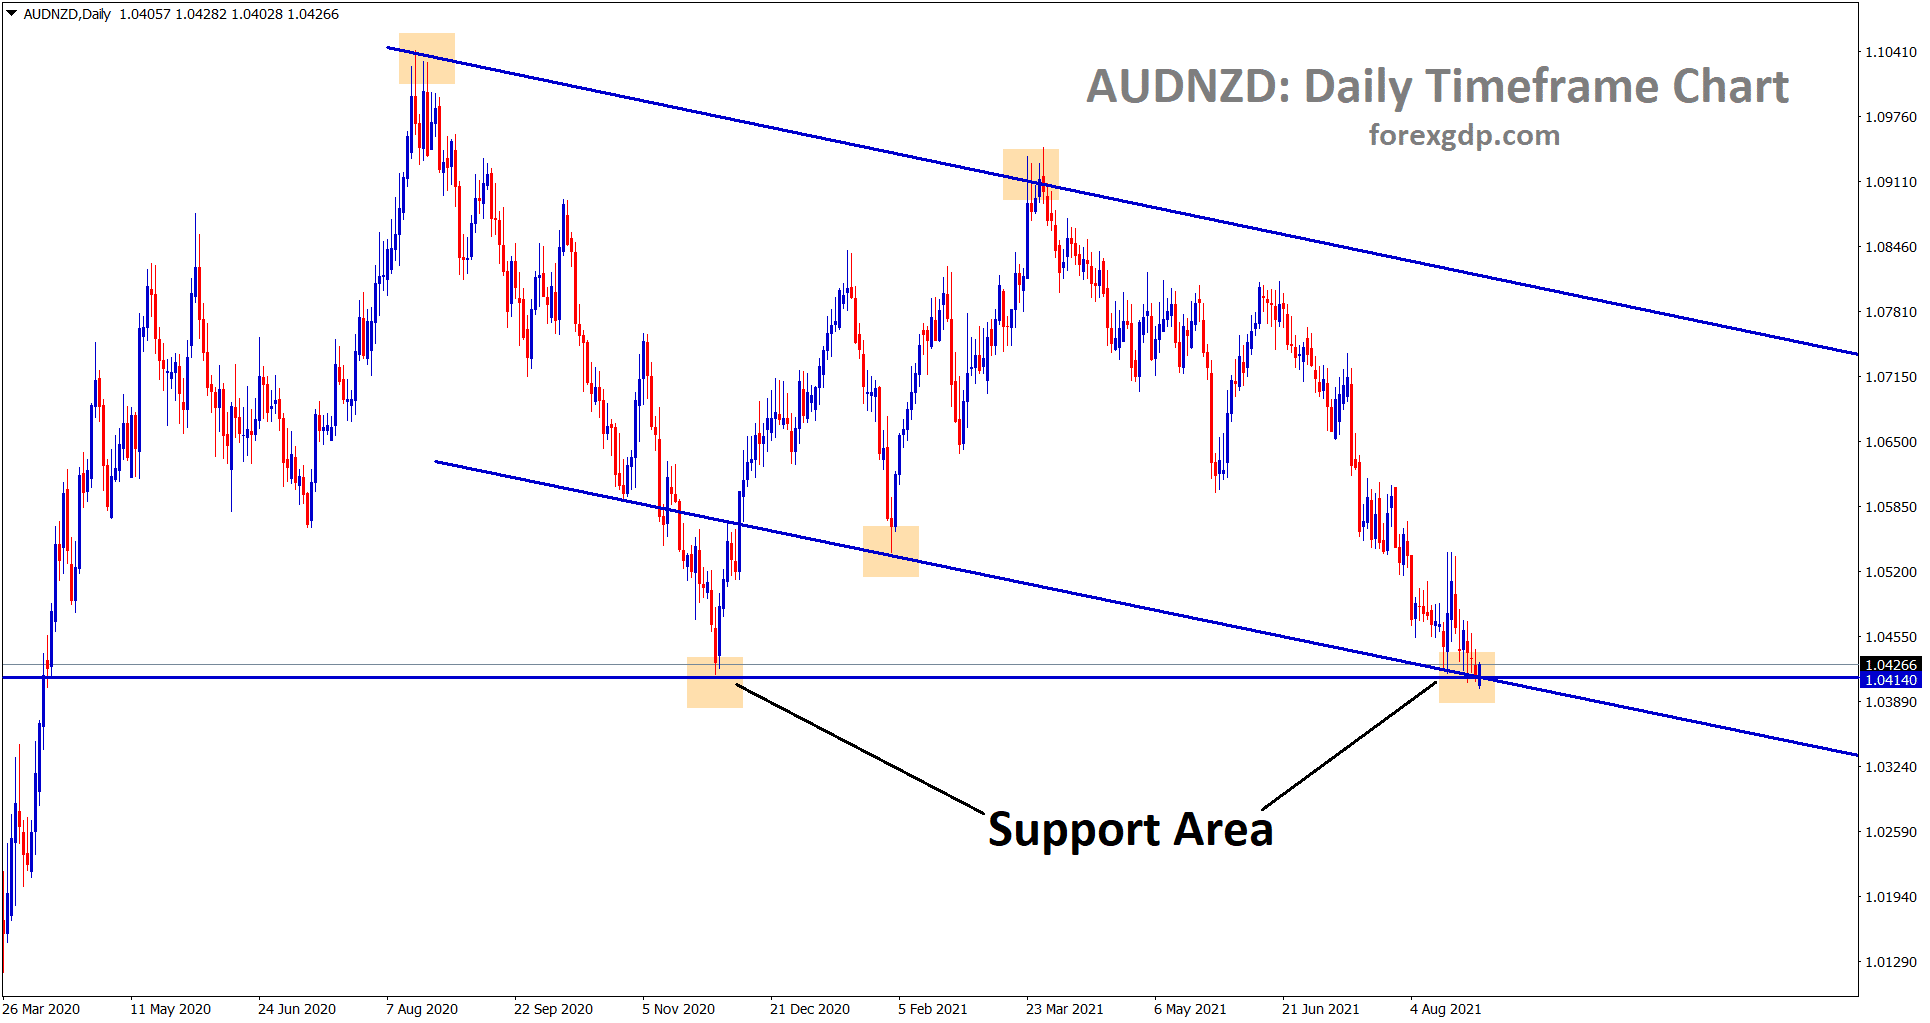 audnzd standing exactly at the support area of the descending triangle and channel line